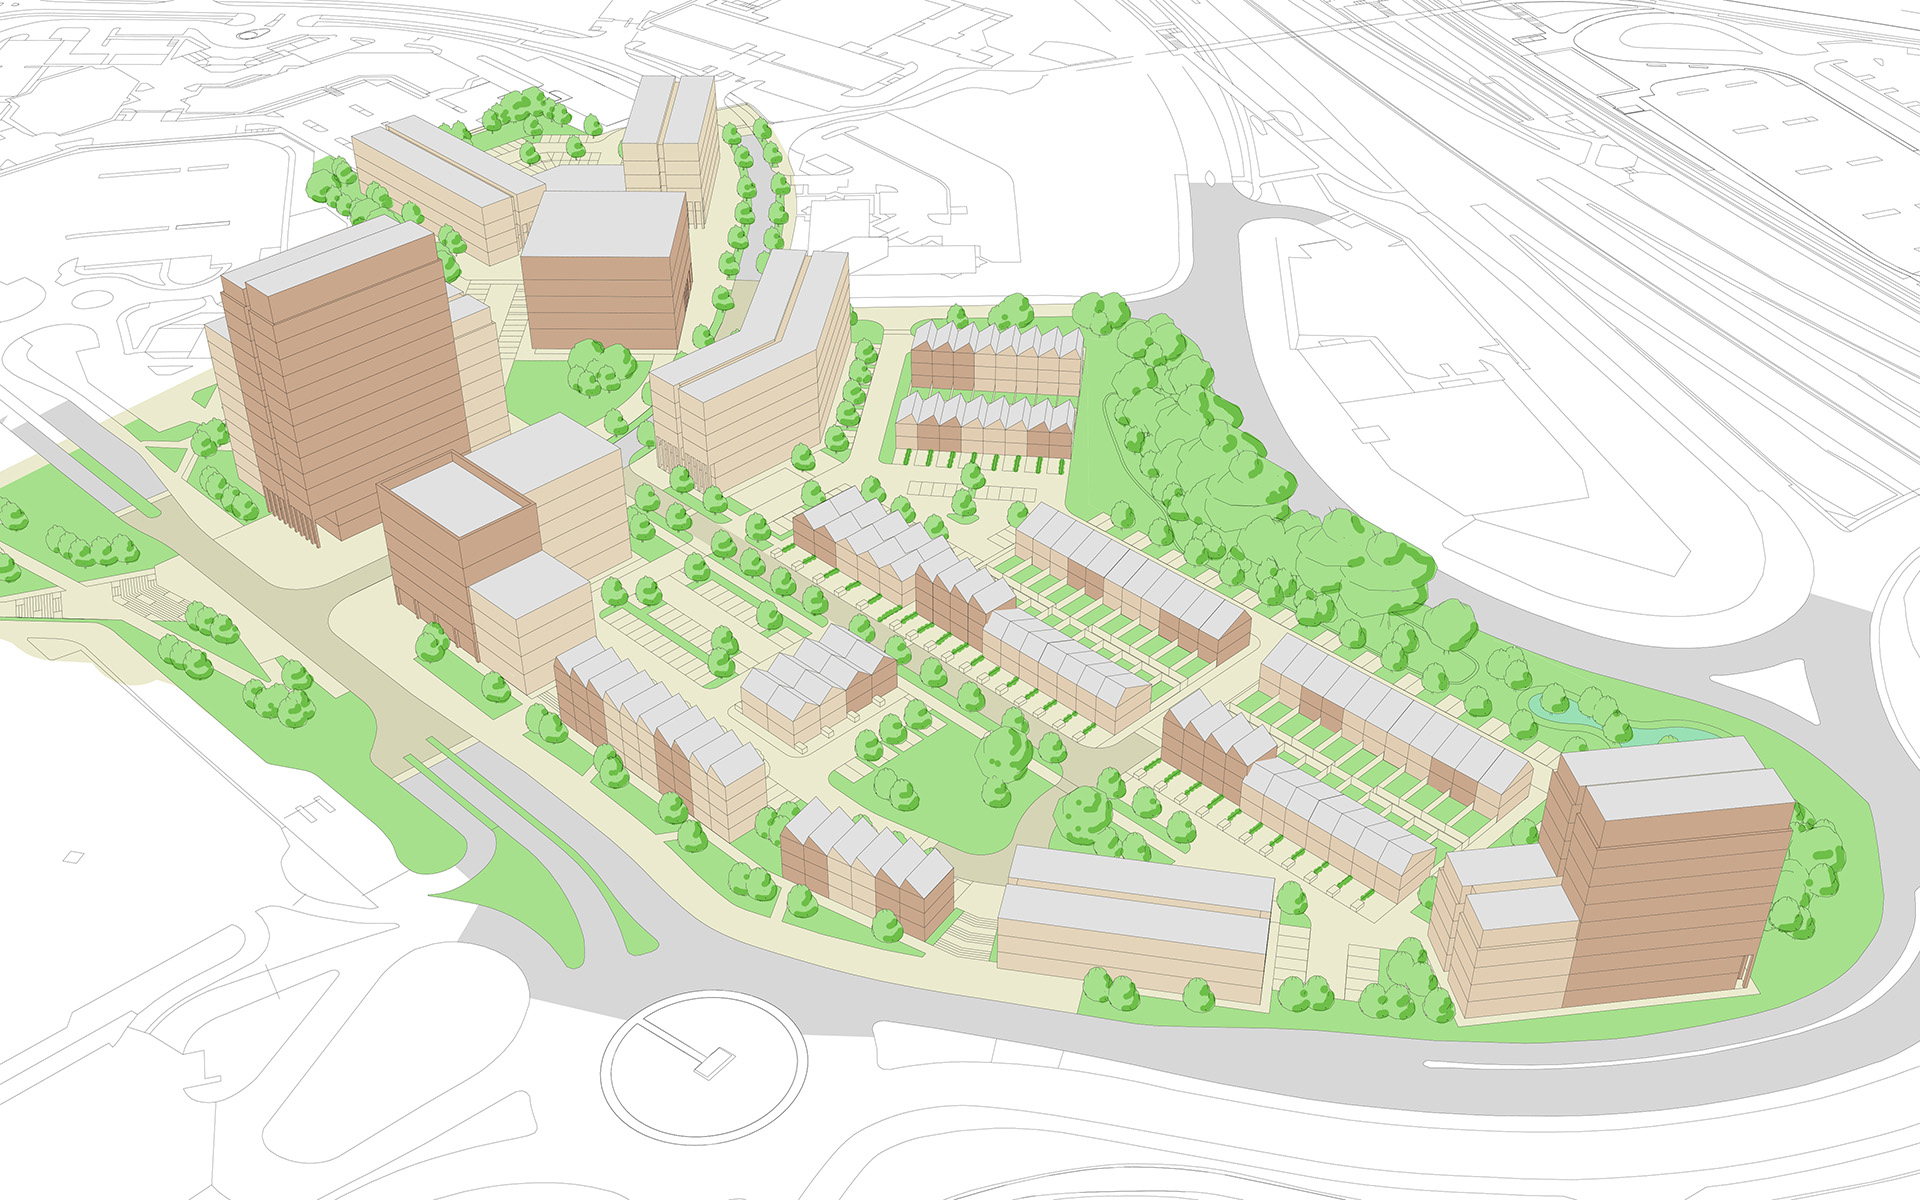 An artist's impression of the new Station Quarter site